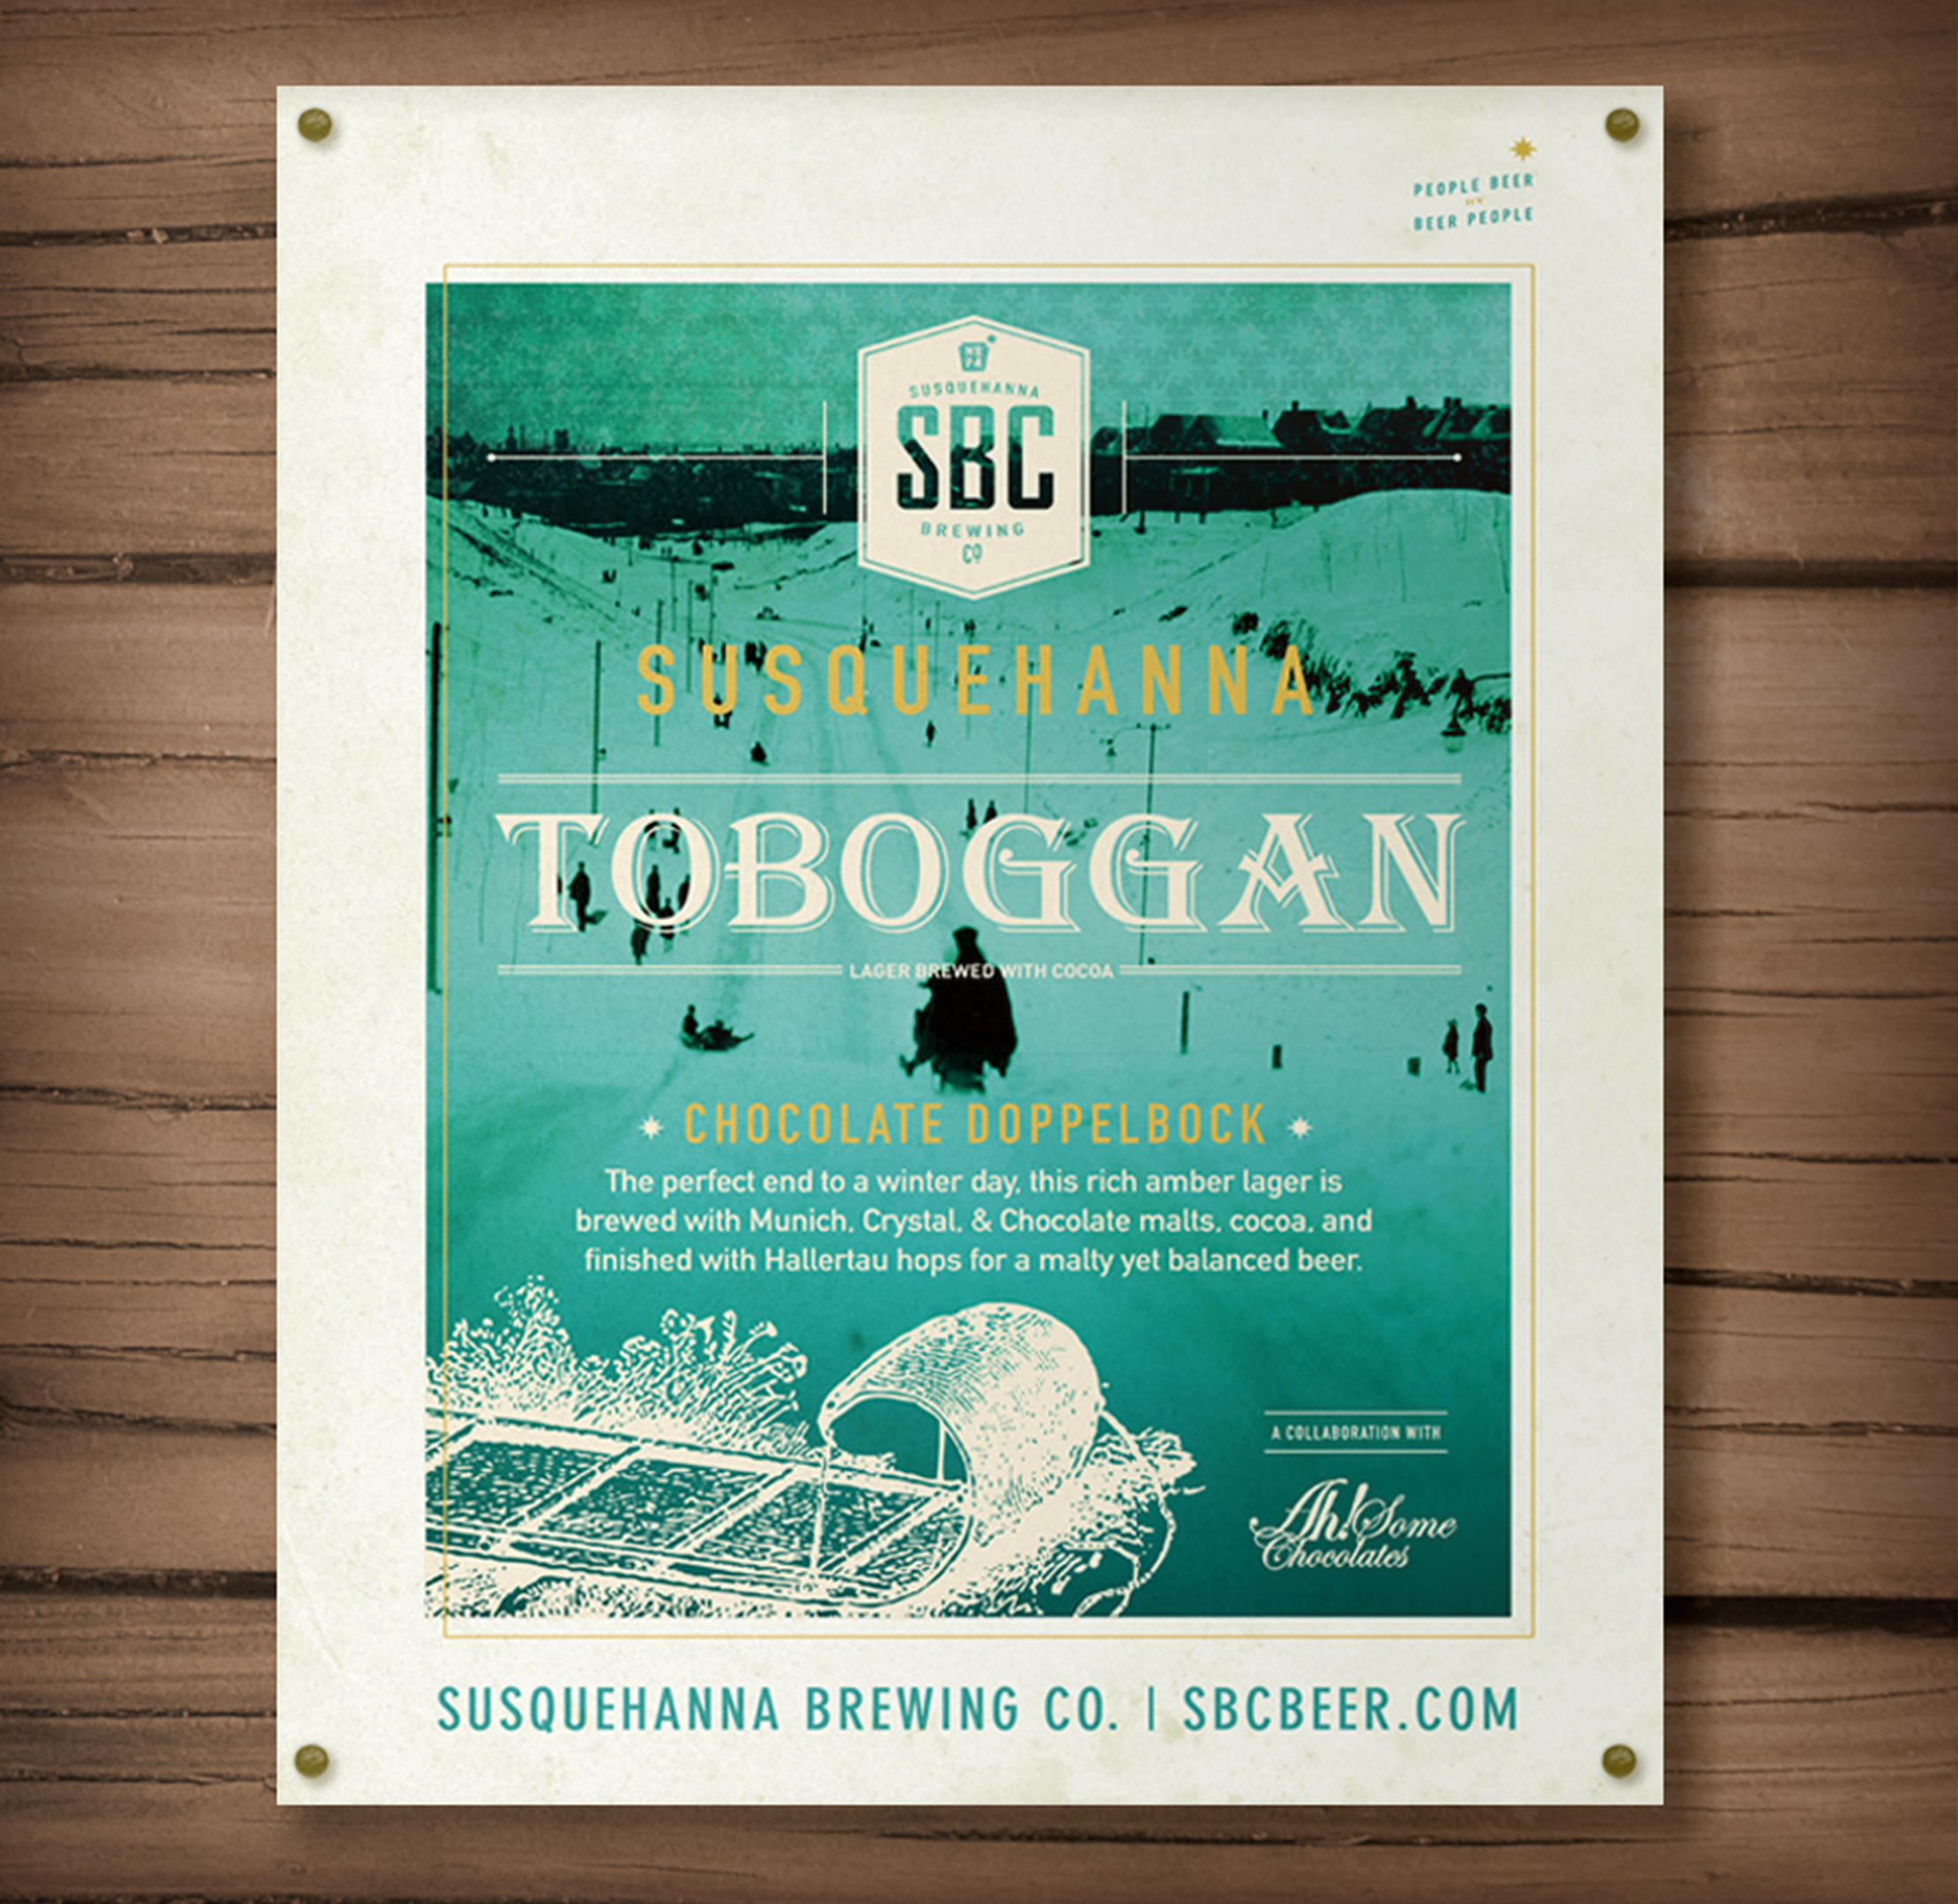 Susquehanna Brewing Co. Toboggan Chocolate Doppelbock Brand Poster Designed by Just Make Things